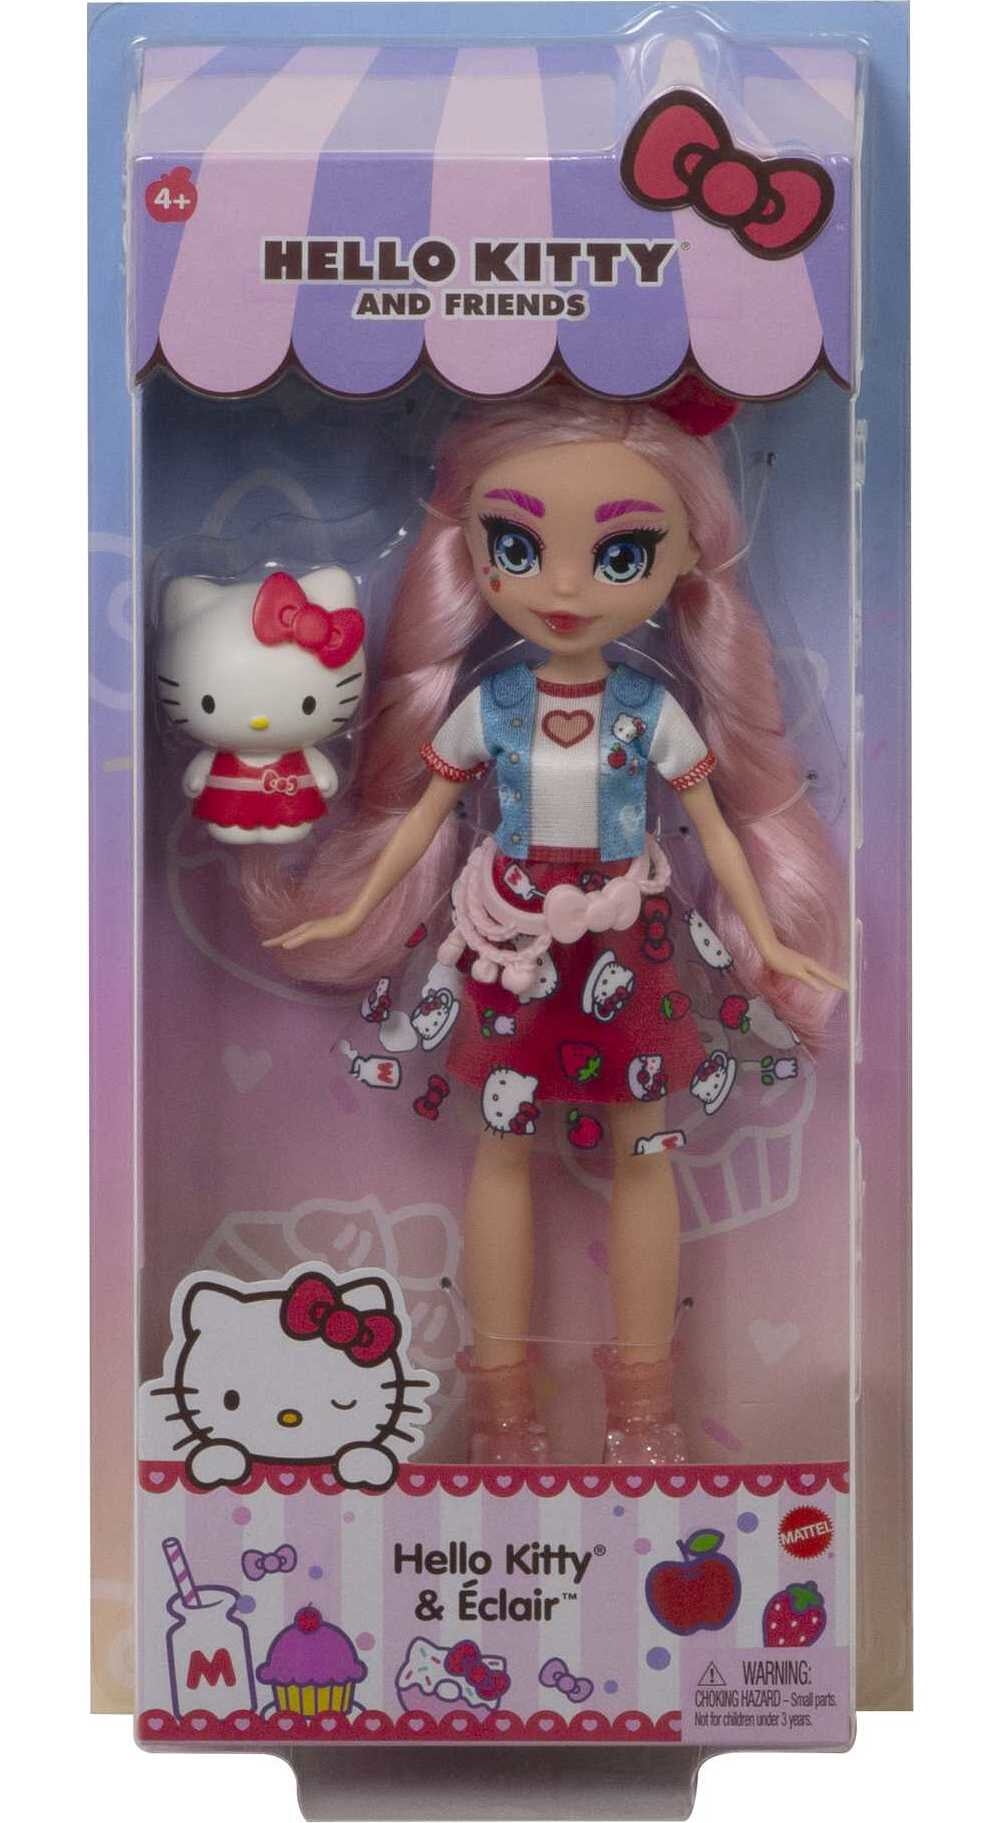 Hello Kitty And Friends So-Delish Kitchen Playset, Hello Kitty And Eclair  Doll (~10-In / 25.4-Cm) With 25 Accessories - Walmart.com